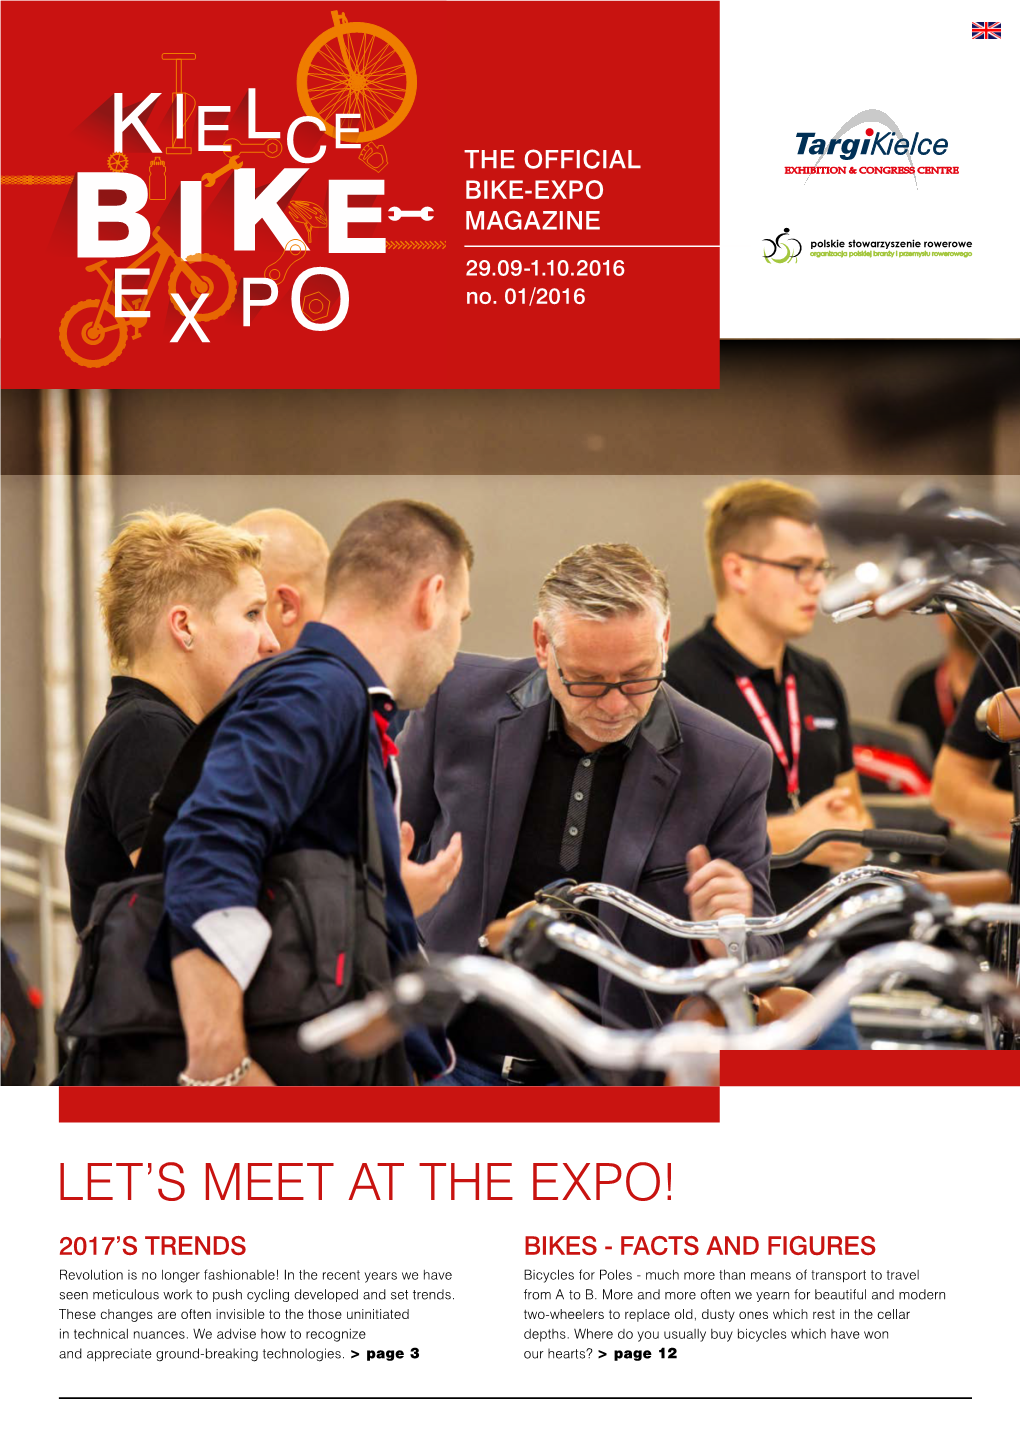 Let's Meet at the Expo!